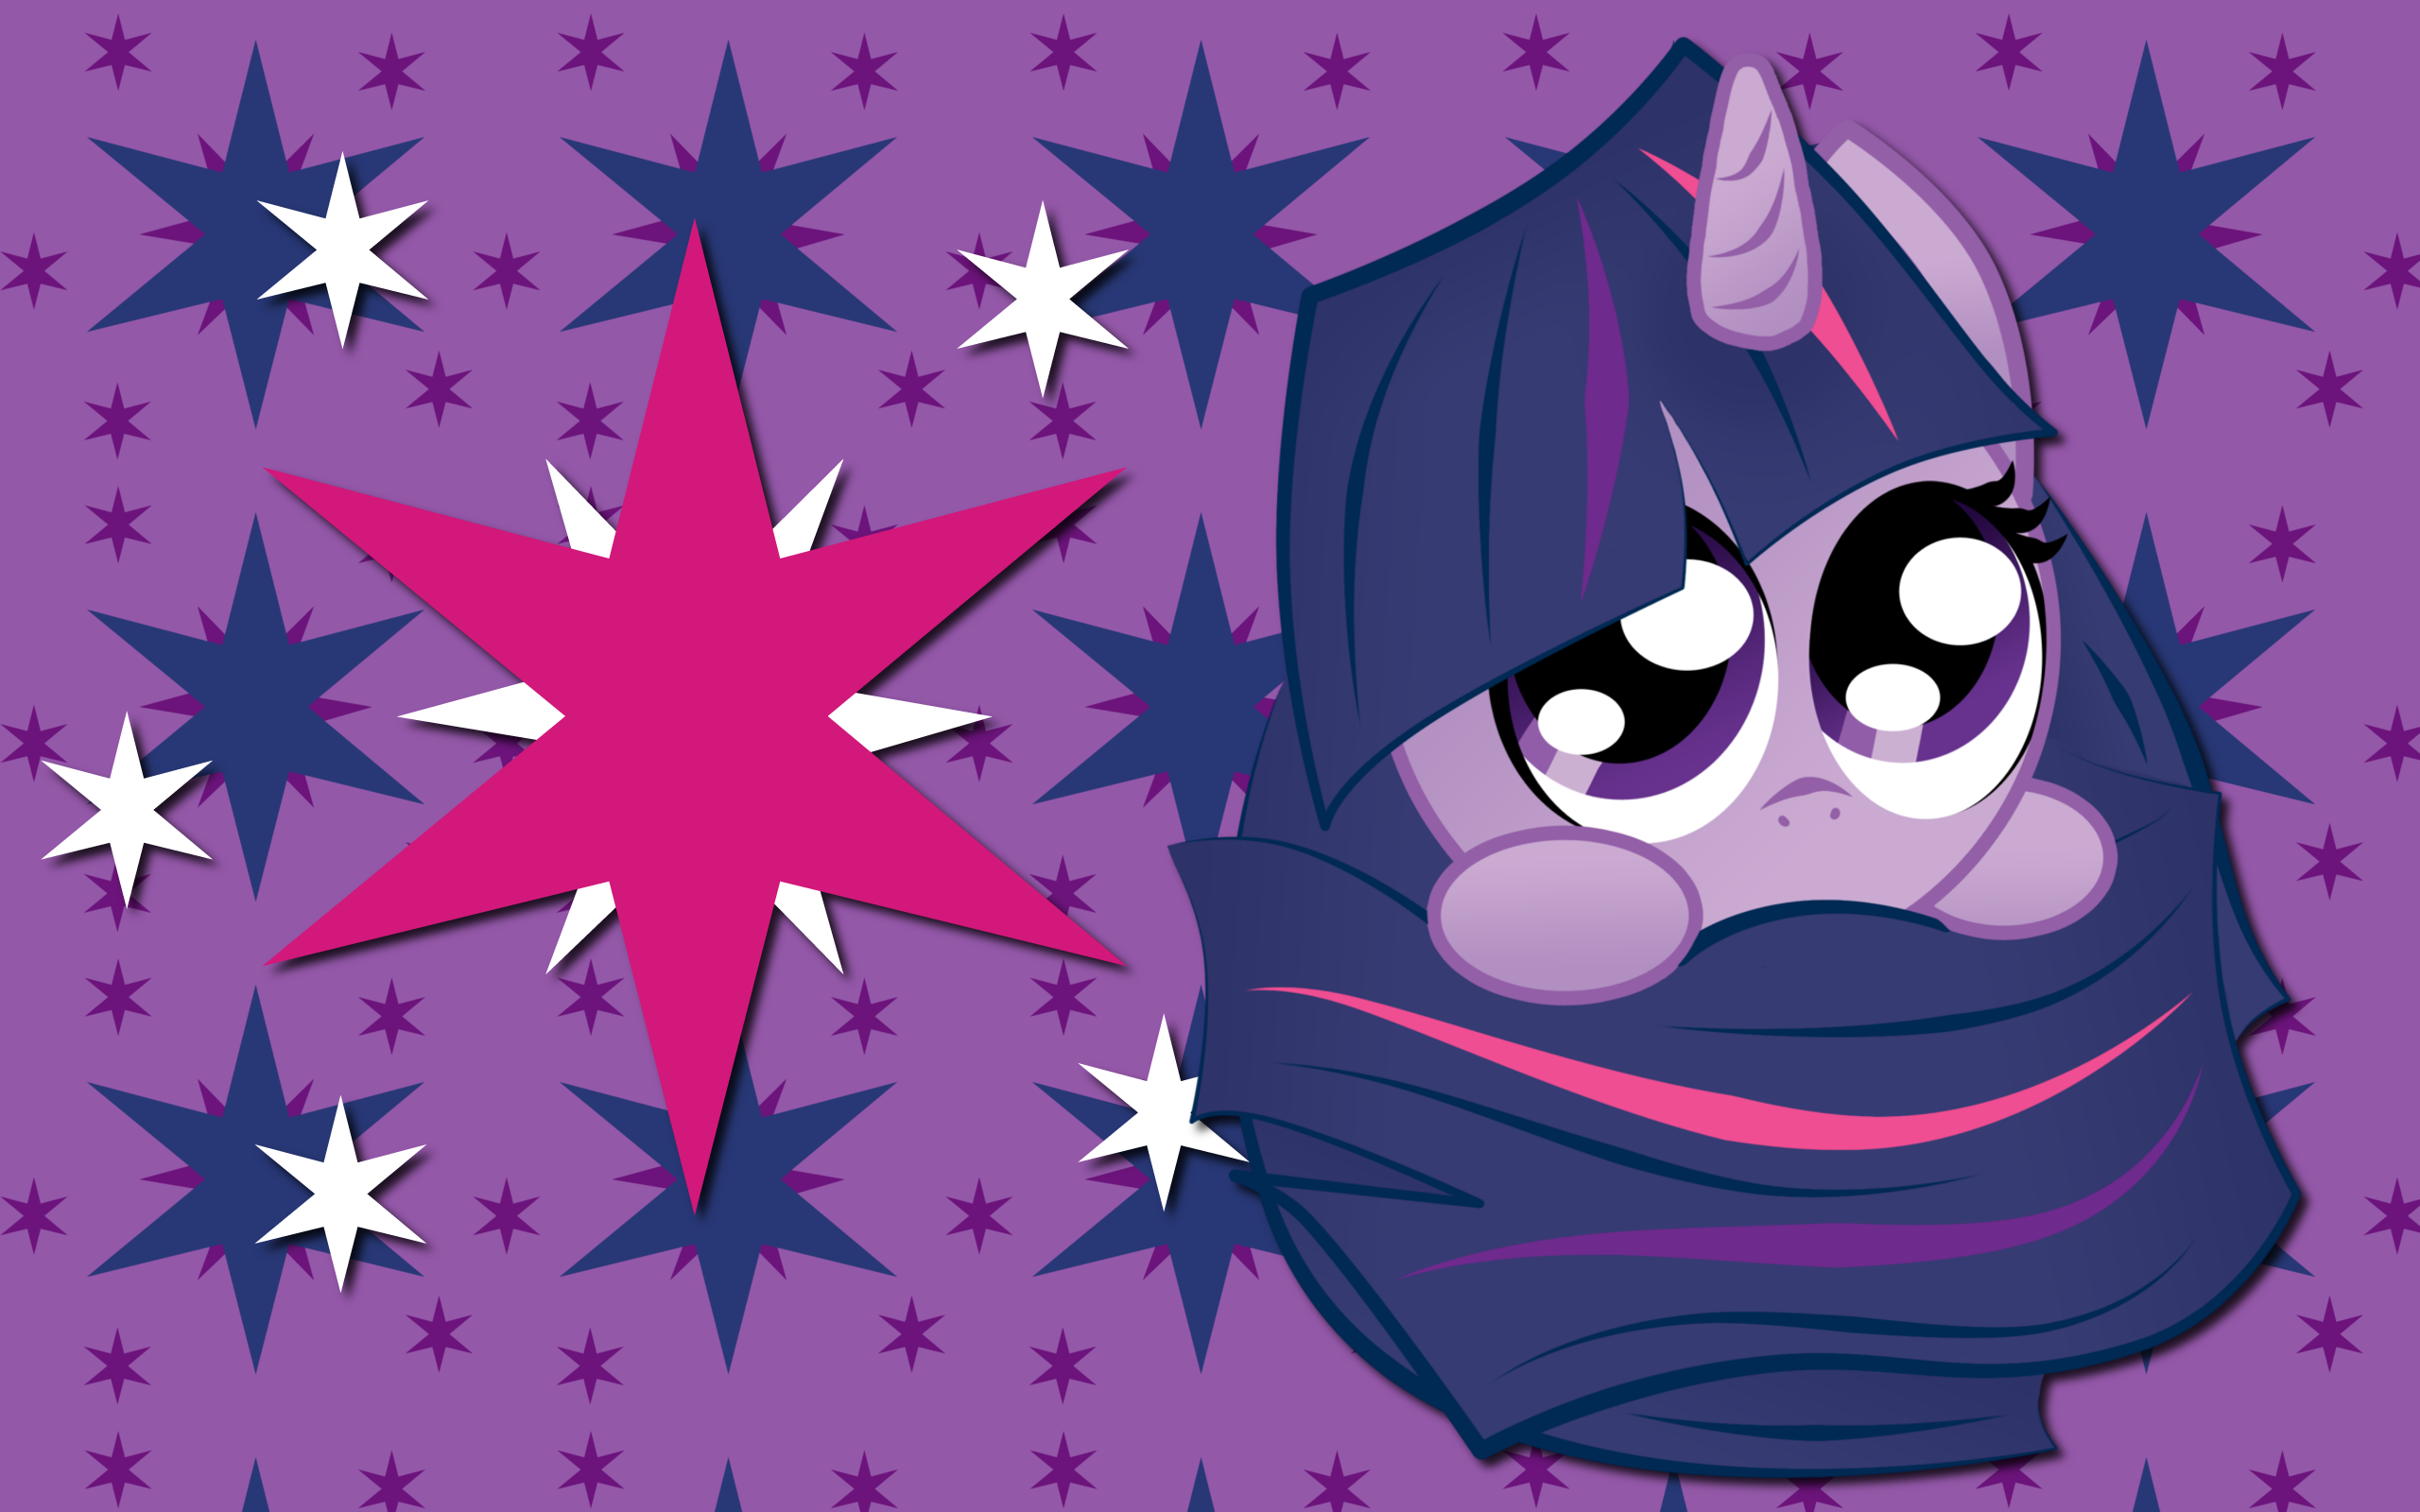 Twilight Sparkle Sphere WP by AliceHumanSacrifice0, ooklah and Zackira